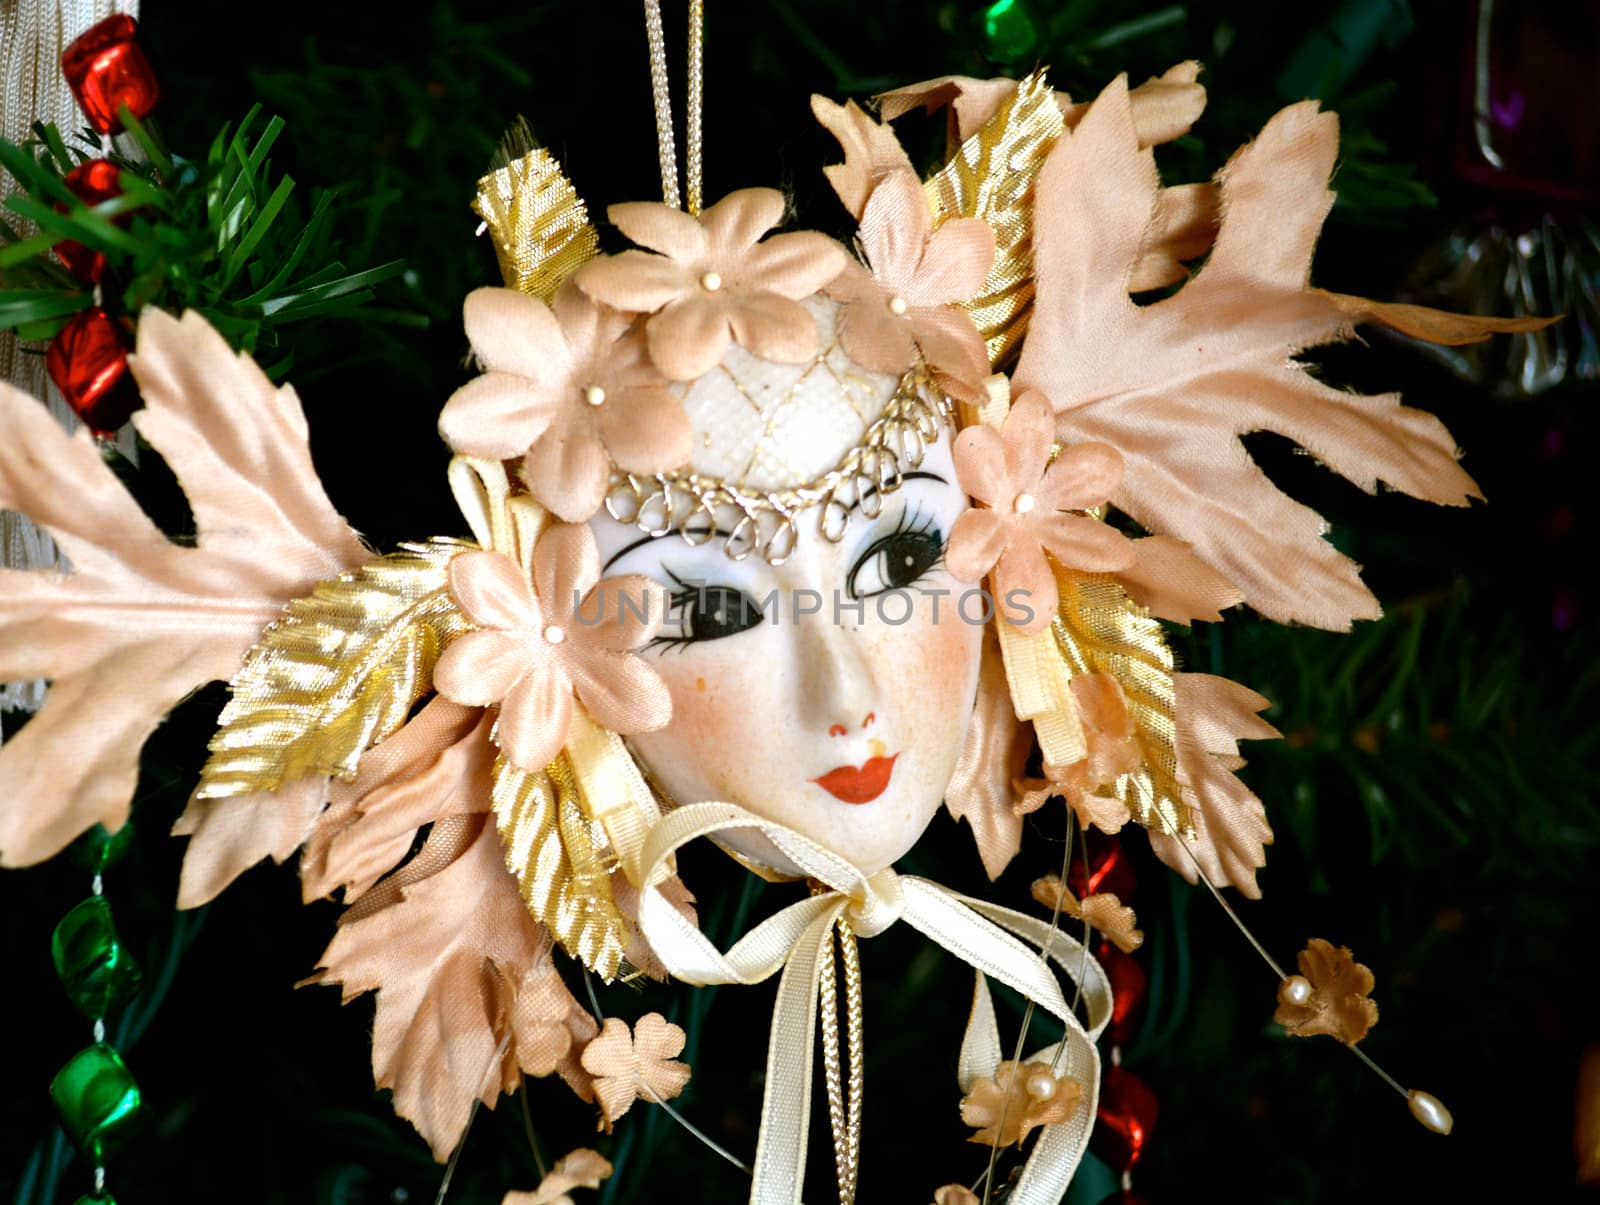 Theatre Mask Ornament hangs on Christmas Tree